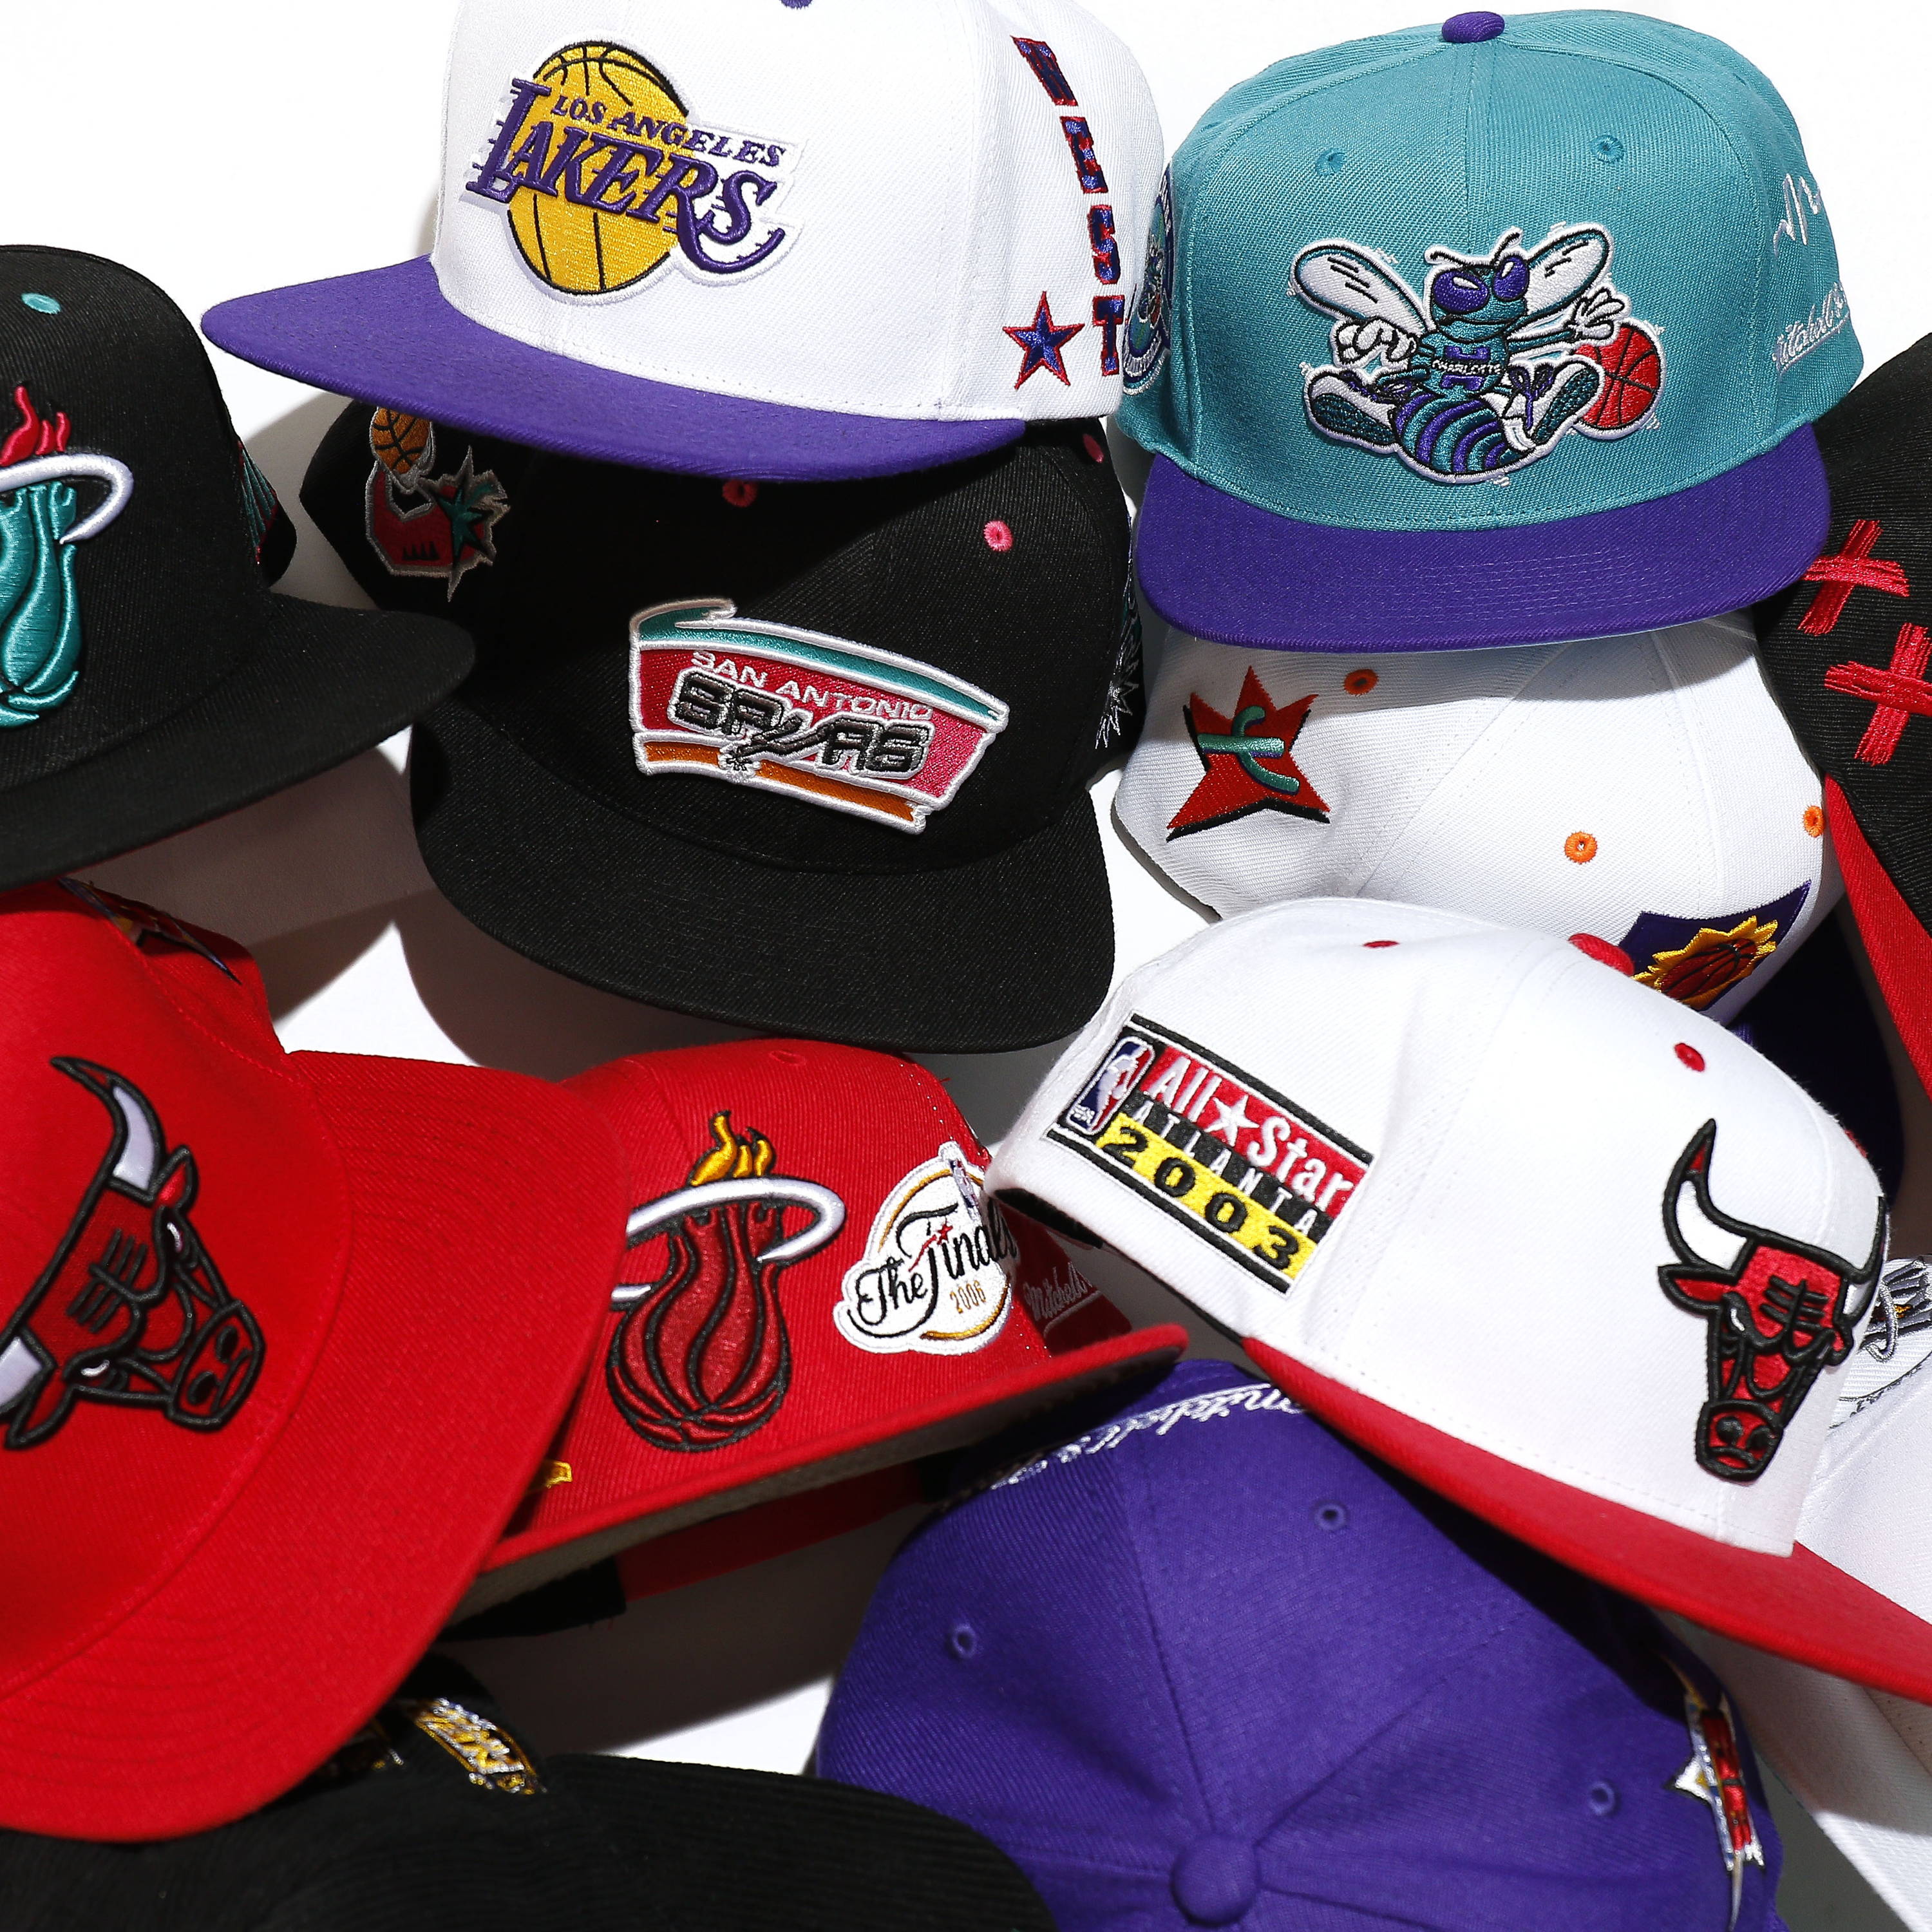 several mitchell & ness hats scattered